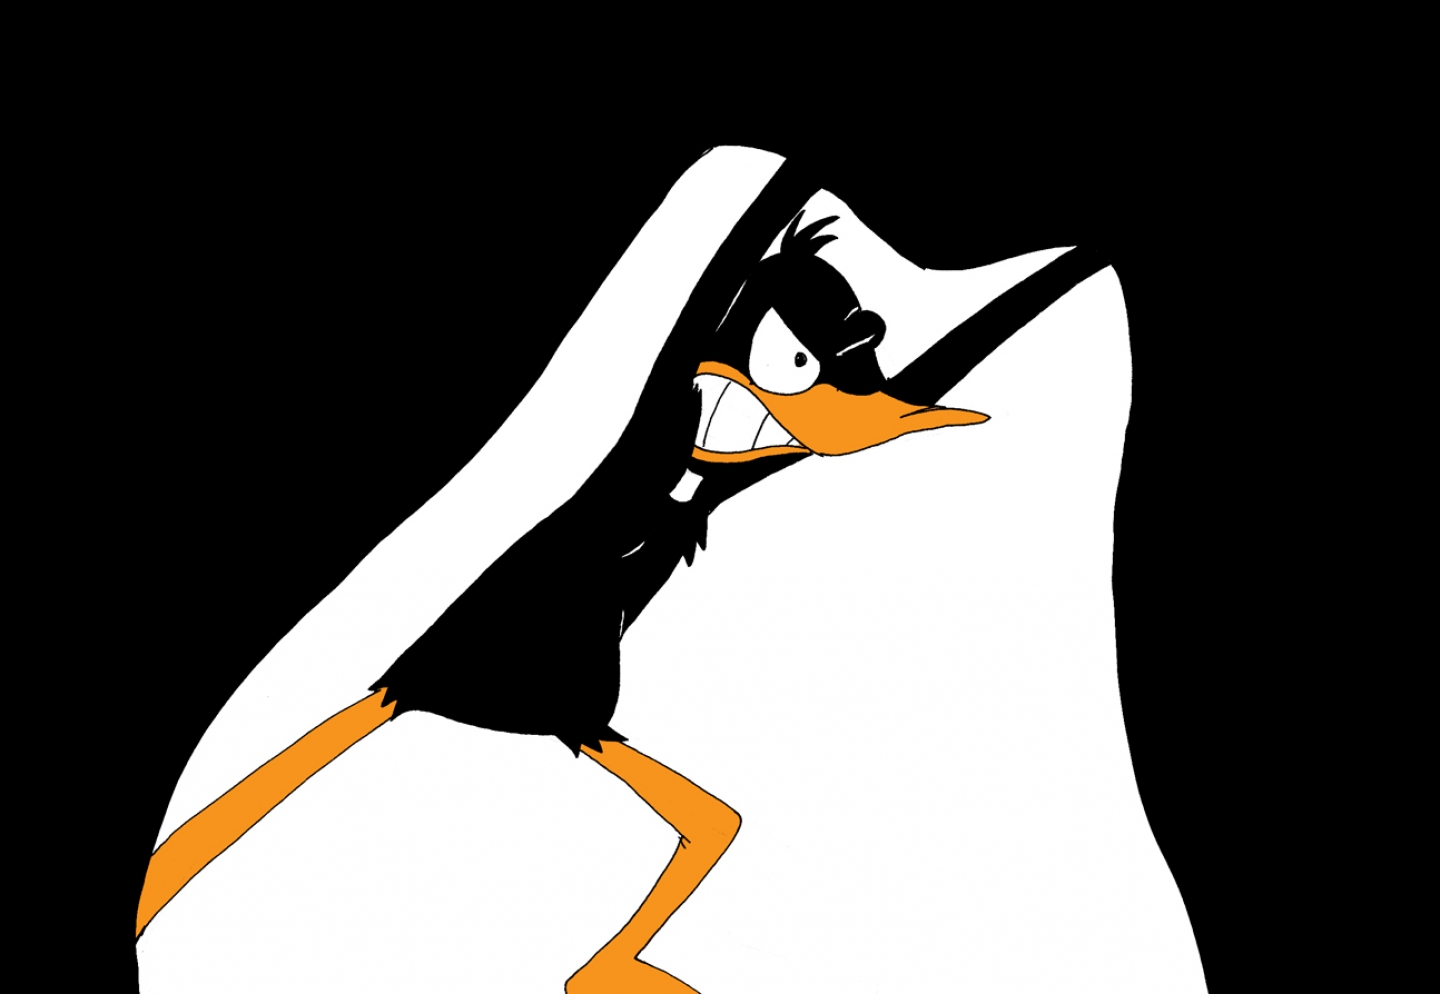 daffy duck by frobman